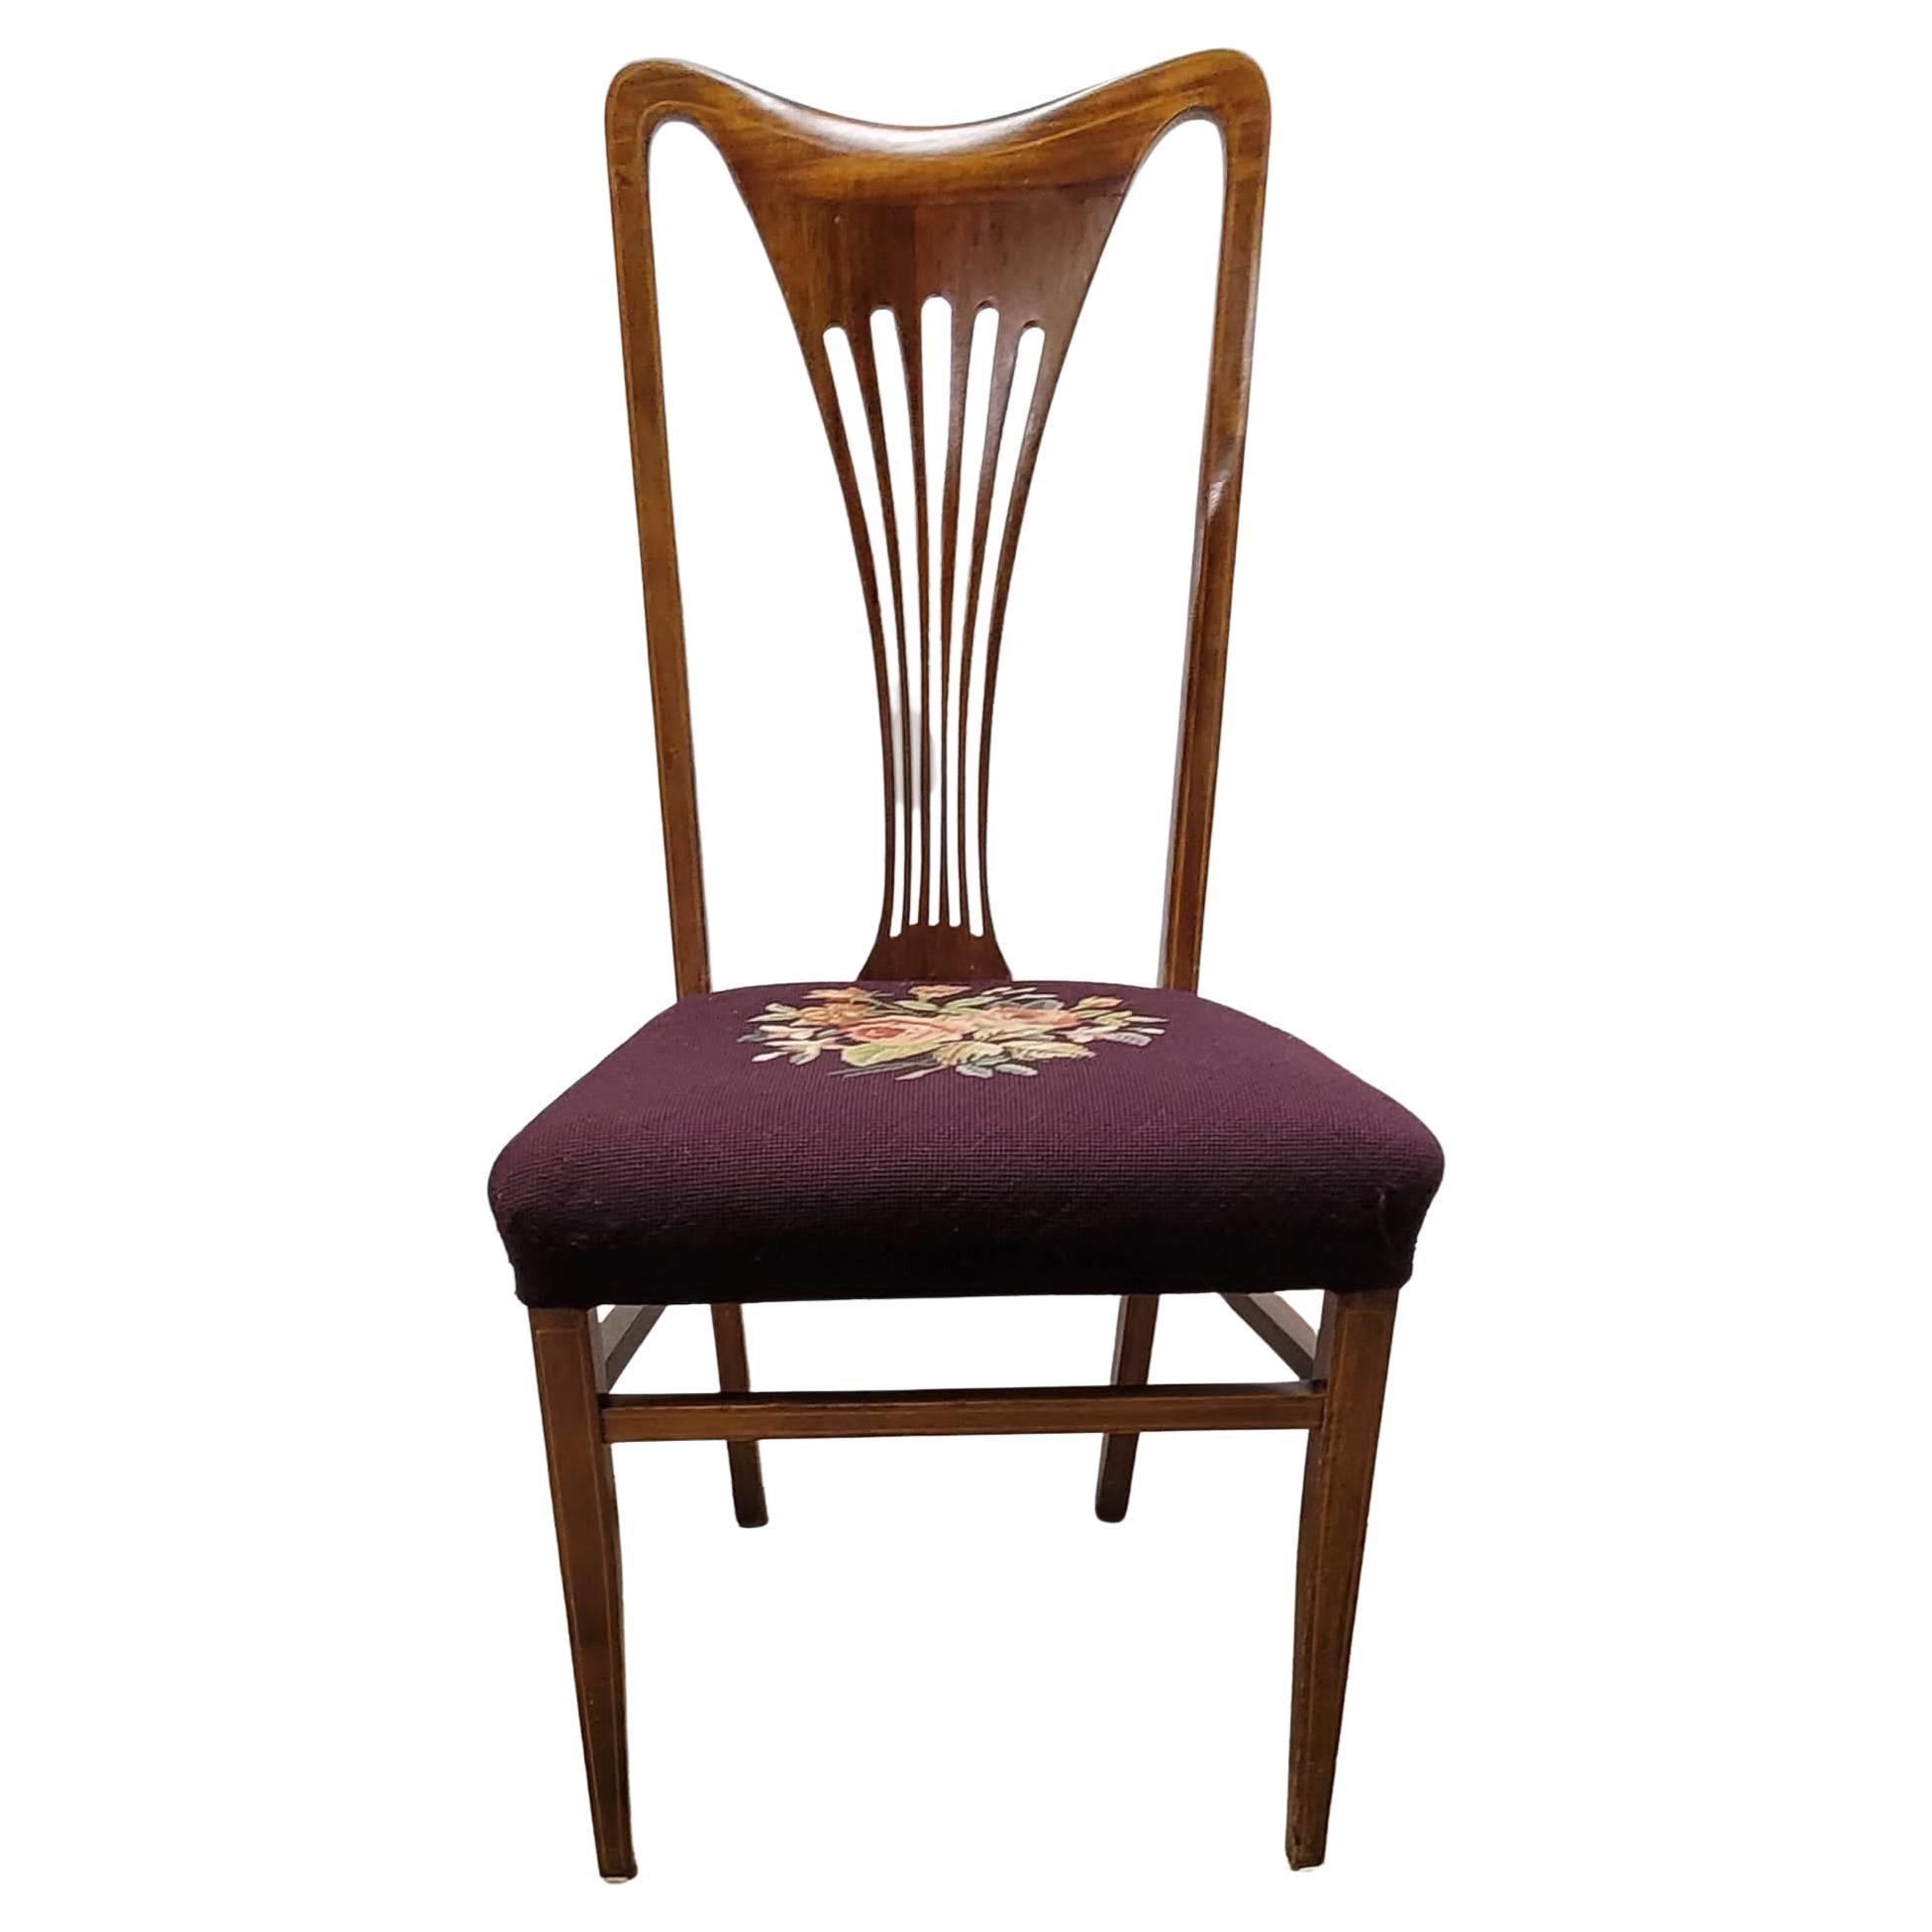 Vintage American Mahogany and Inlay Needlepoint Upholstered Chair For Sale